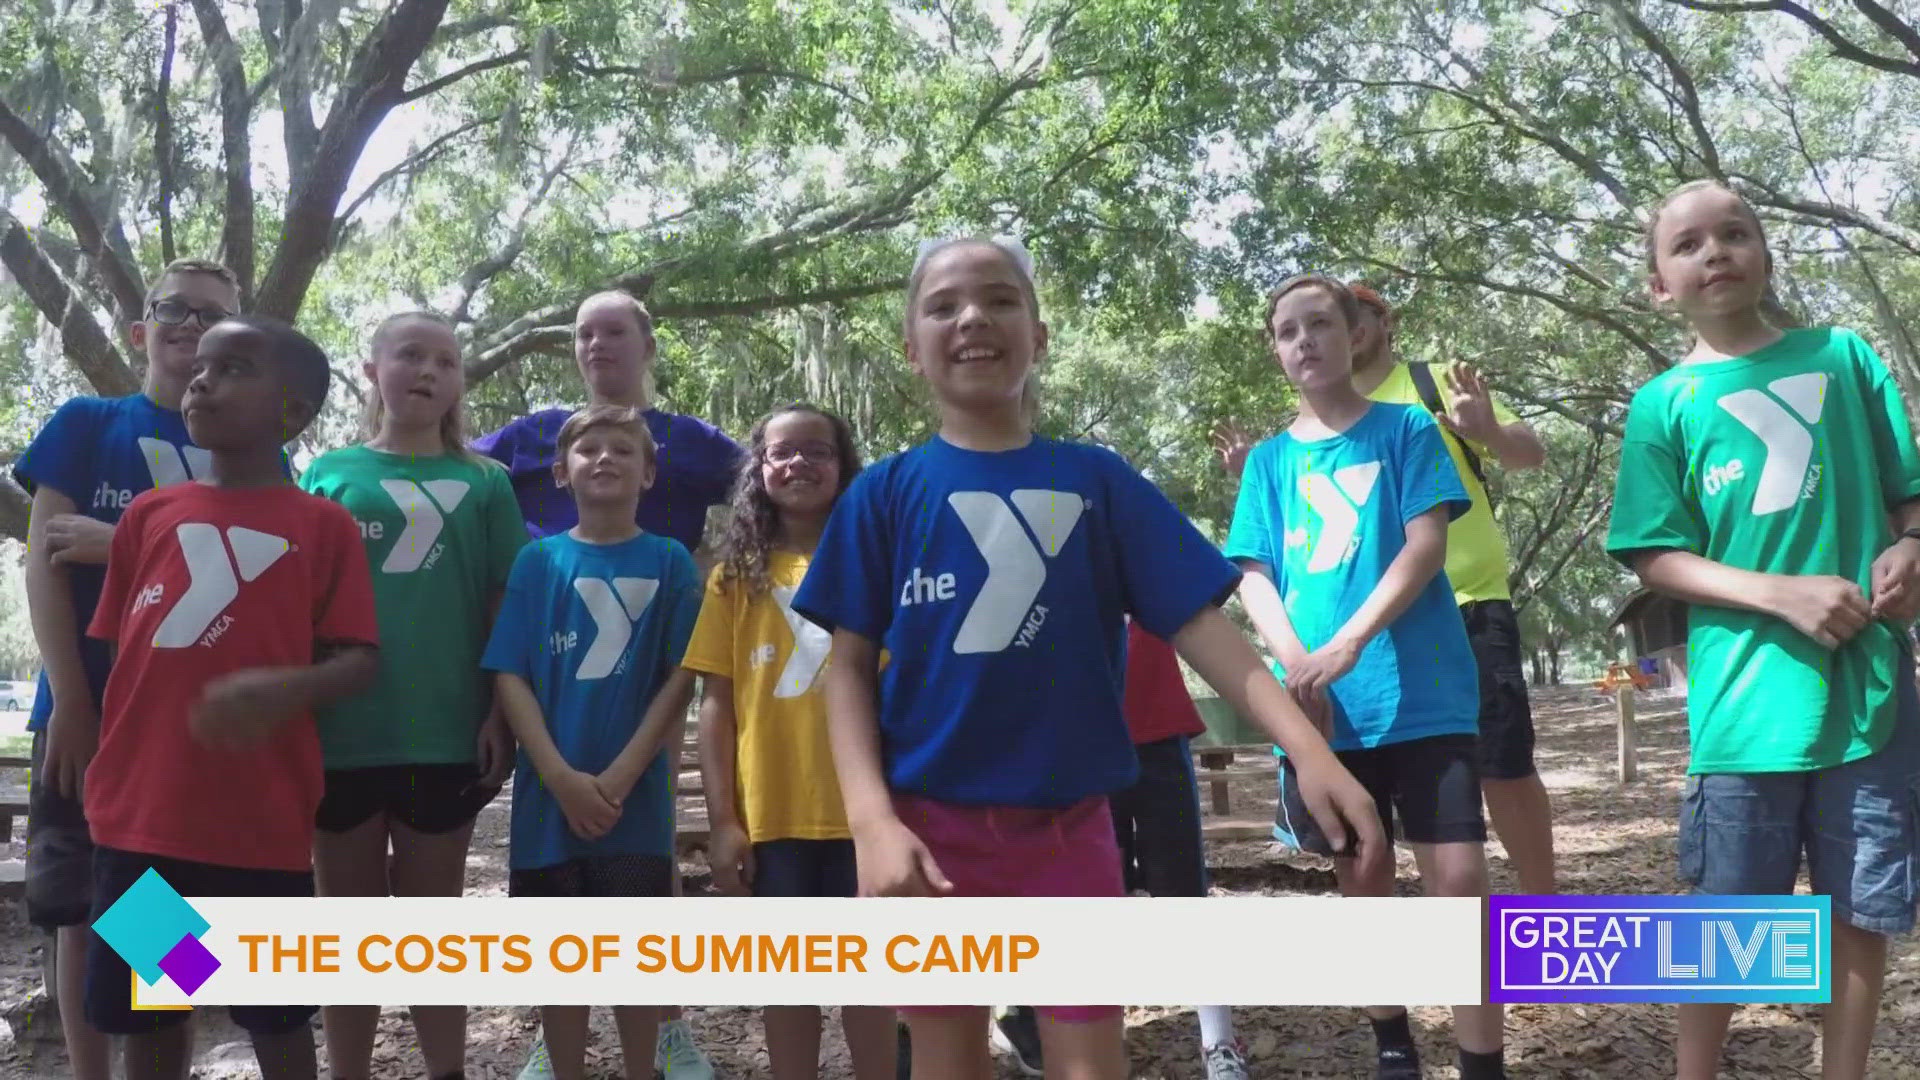 YMCA Camp Cristina shared some tips on getting the most out of camps for your kids this summer.